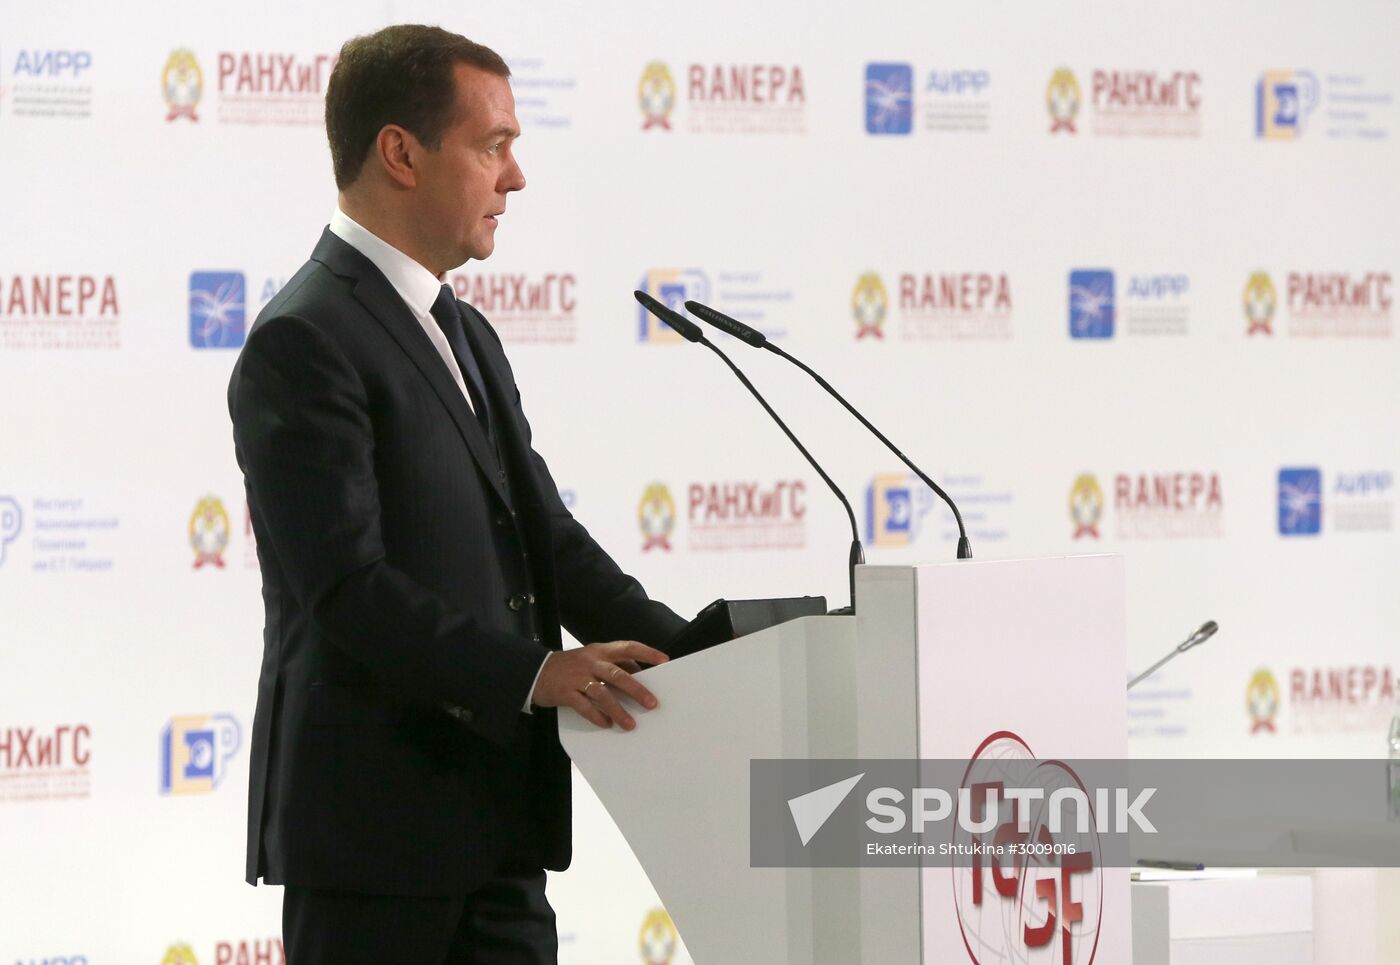 Dmitry Medvedev attends 8th Gaidar Forum "Russia and the World: Setting Priorities"